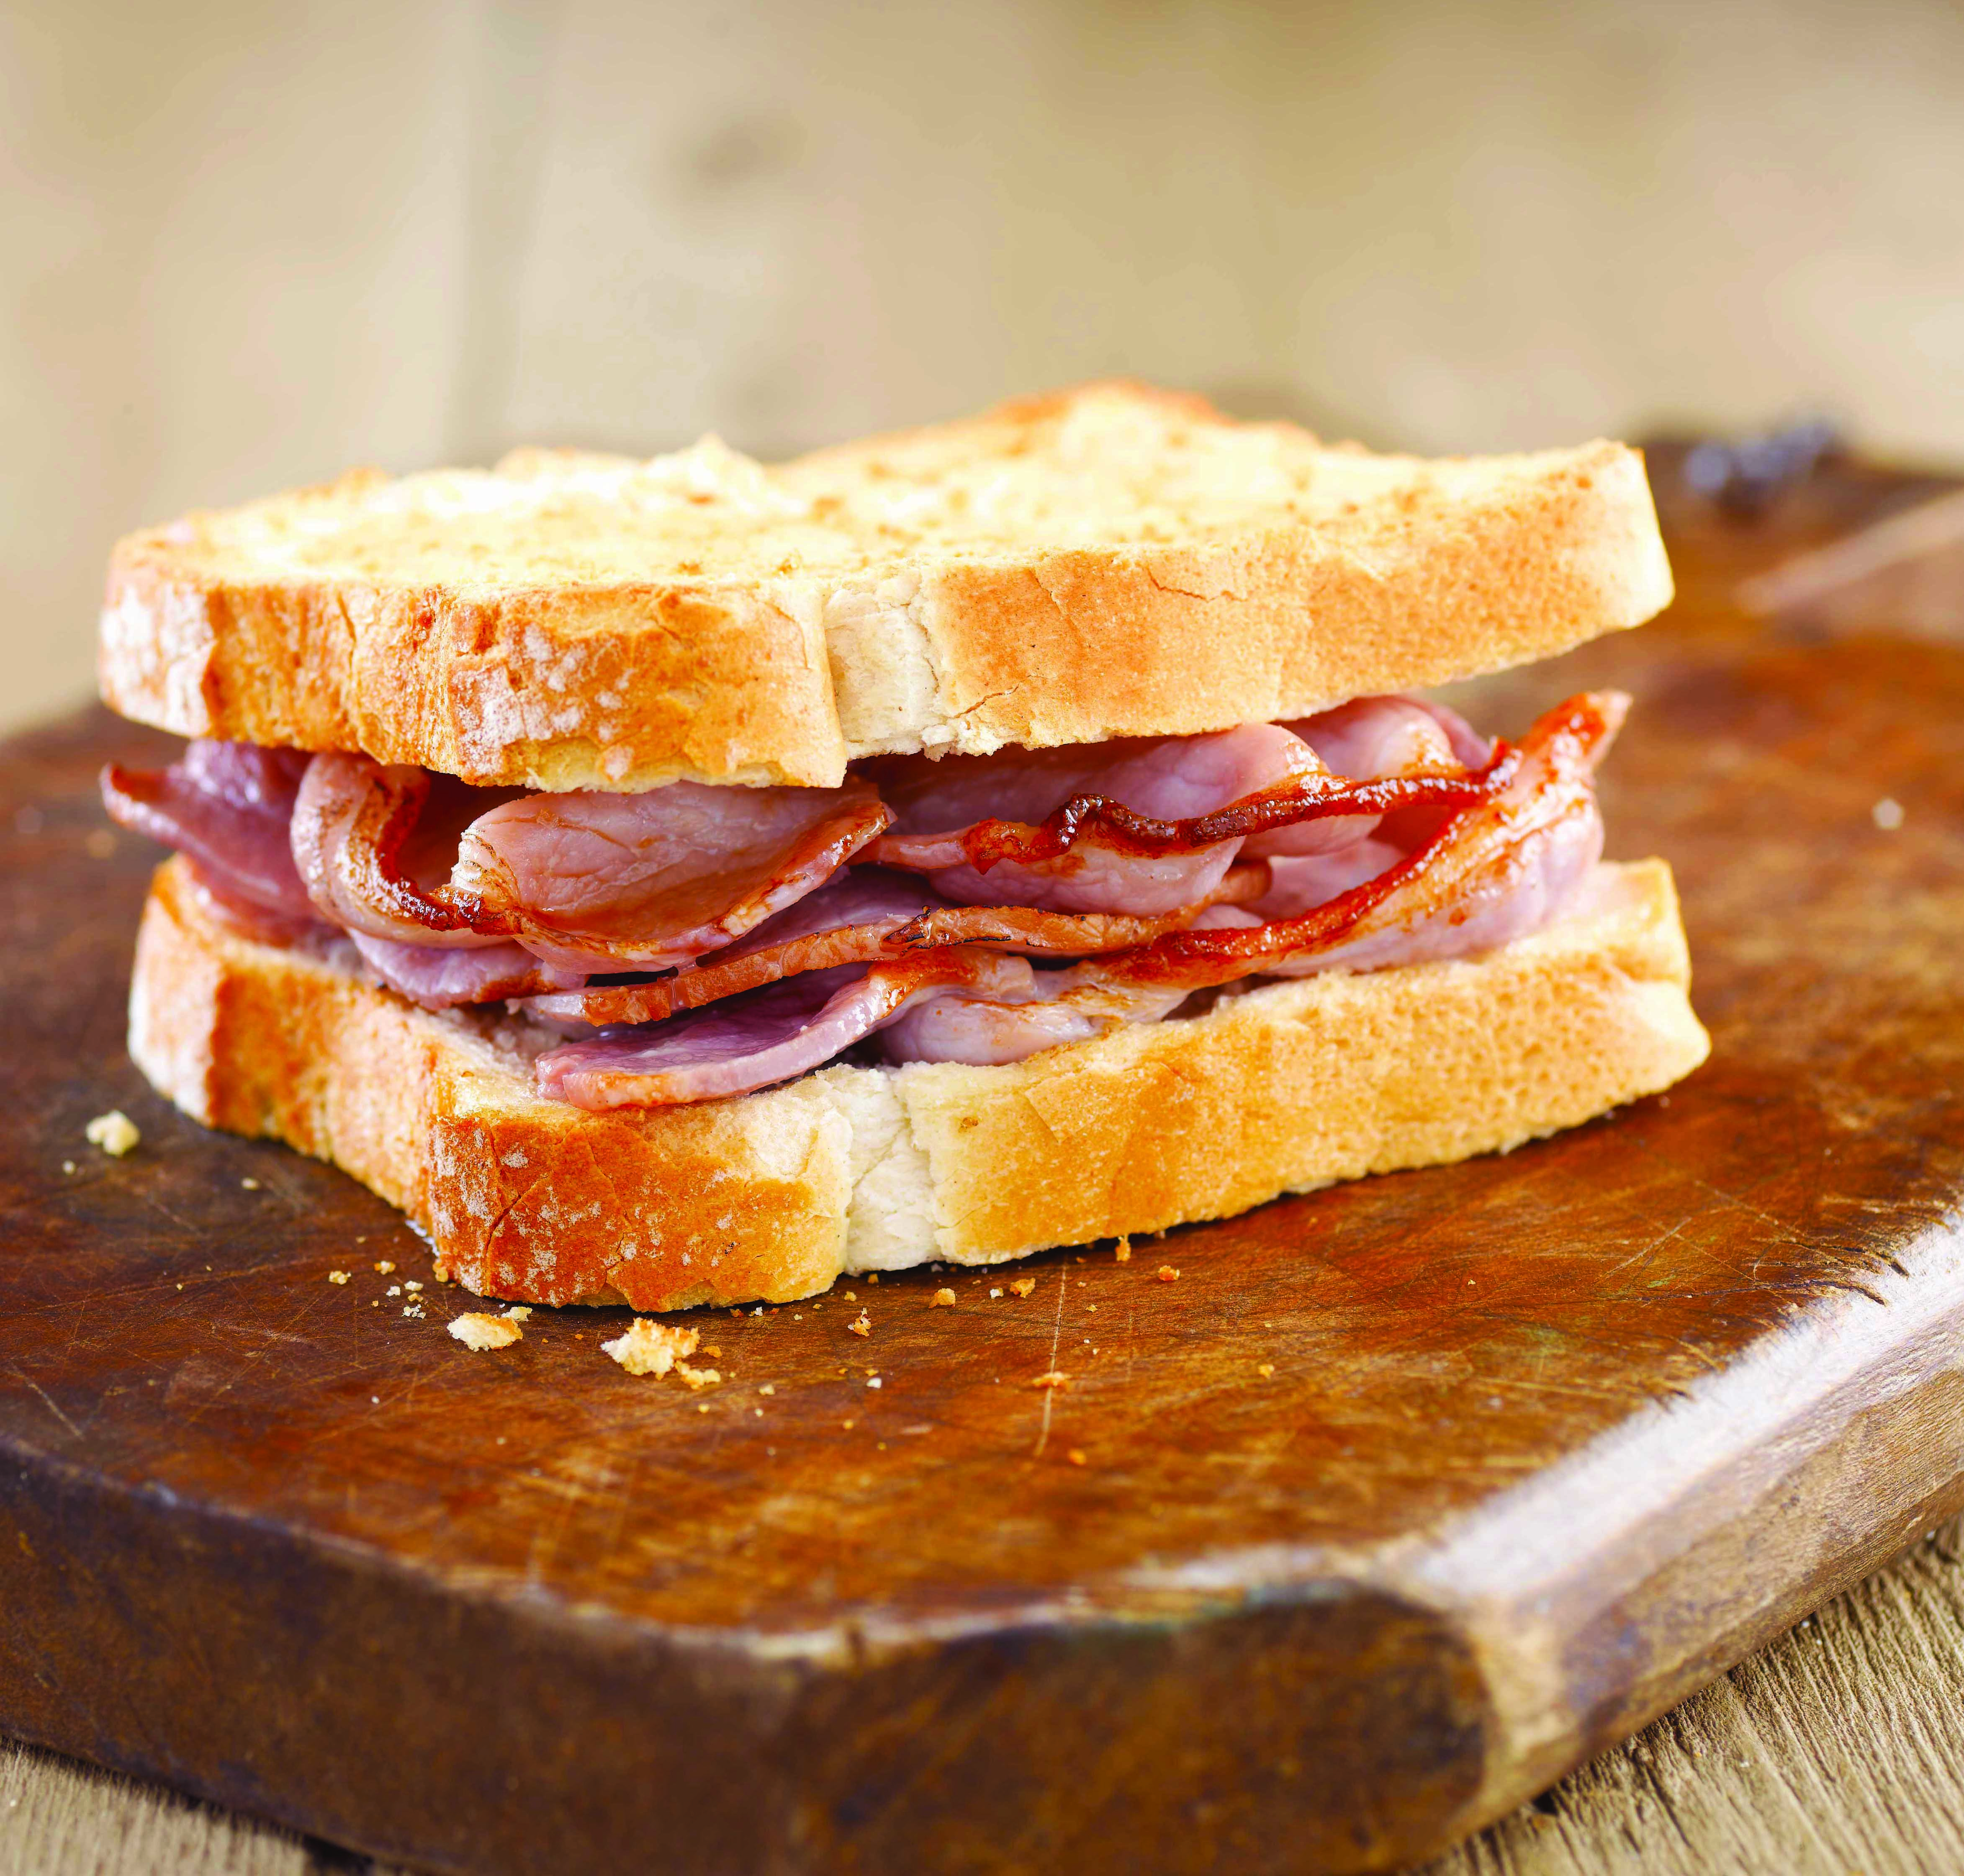 Can you create the perfect bacon sandwich? | Playbuzz